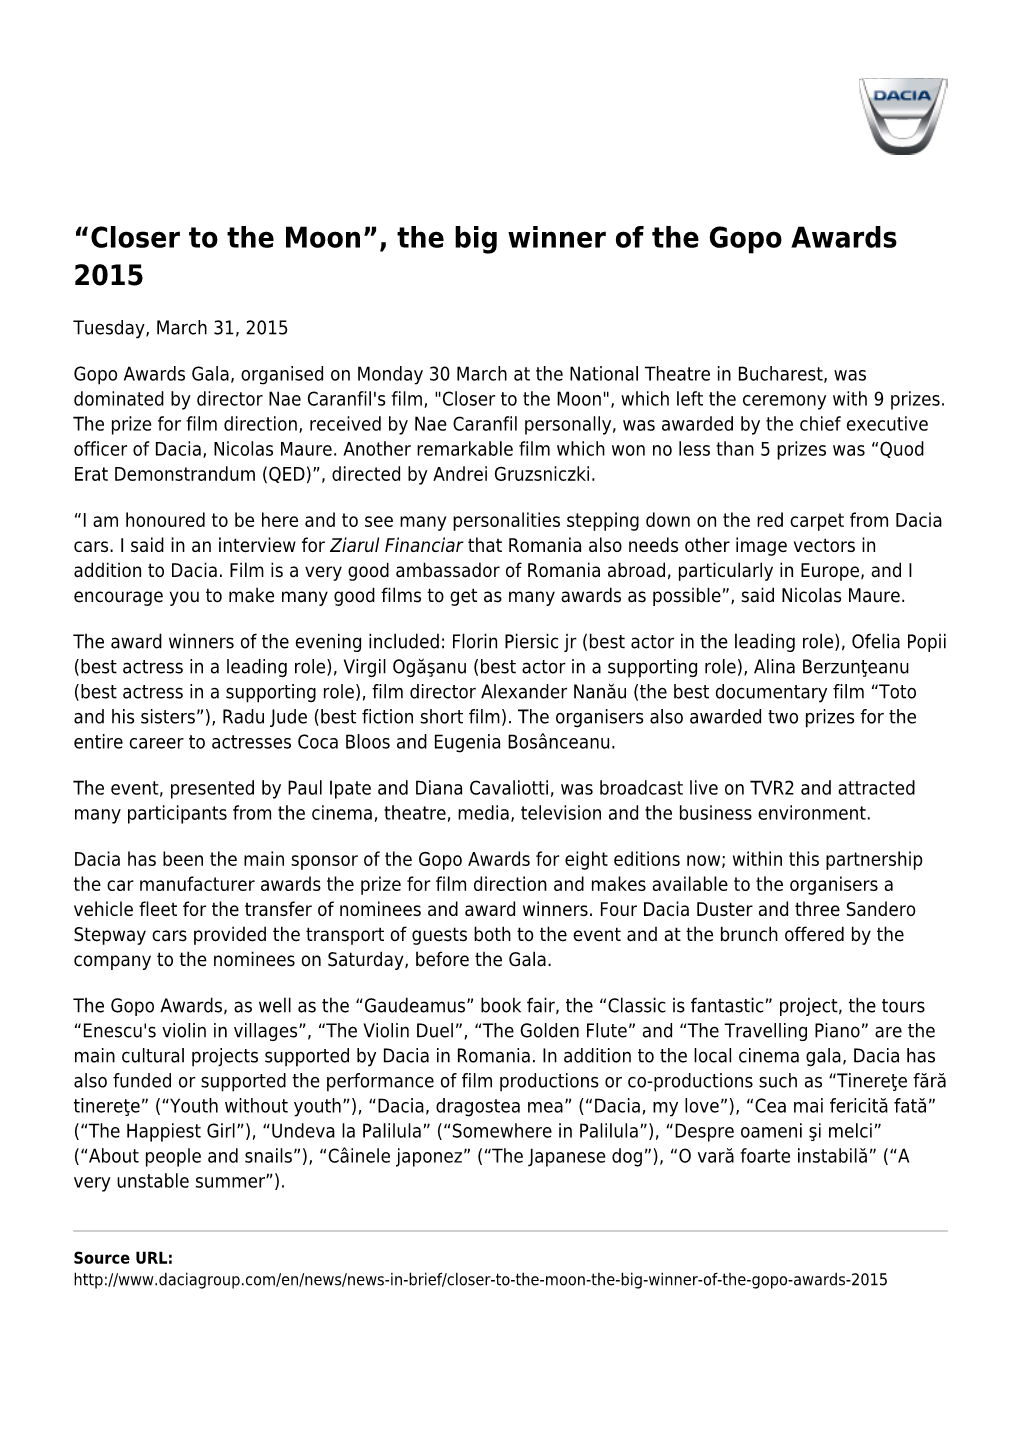 “Closer to the Moon”, the Big Winner of the Gopo Awards 2015